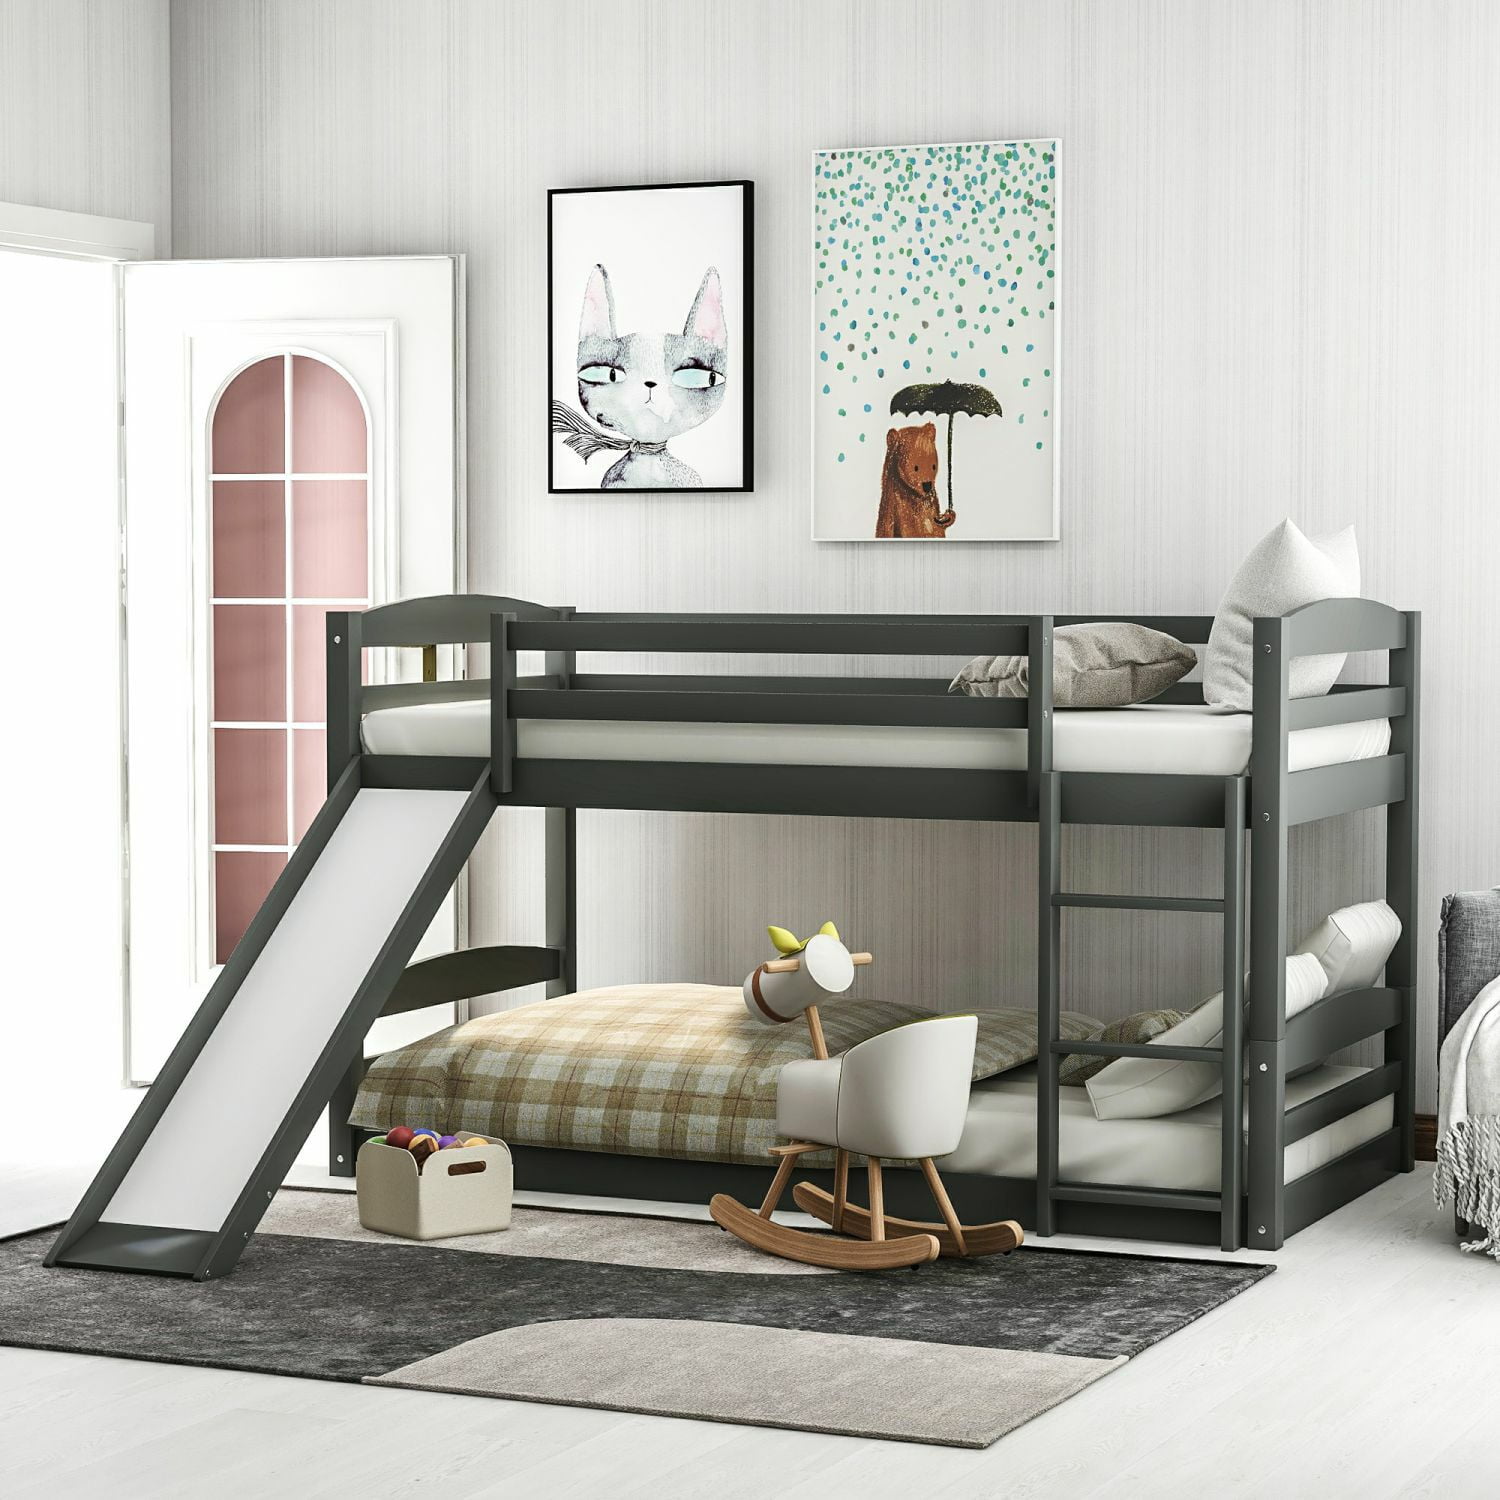 Modern Solid Wood Low Bunk Bed Twin, Bunk Beds That Separate